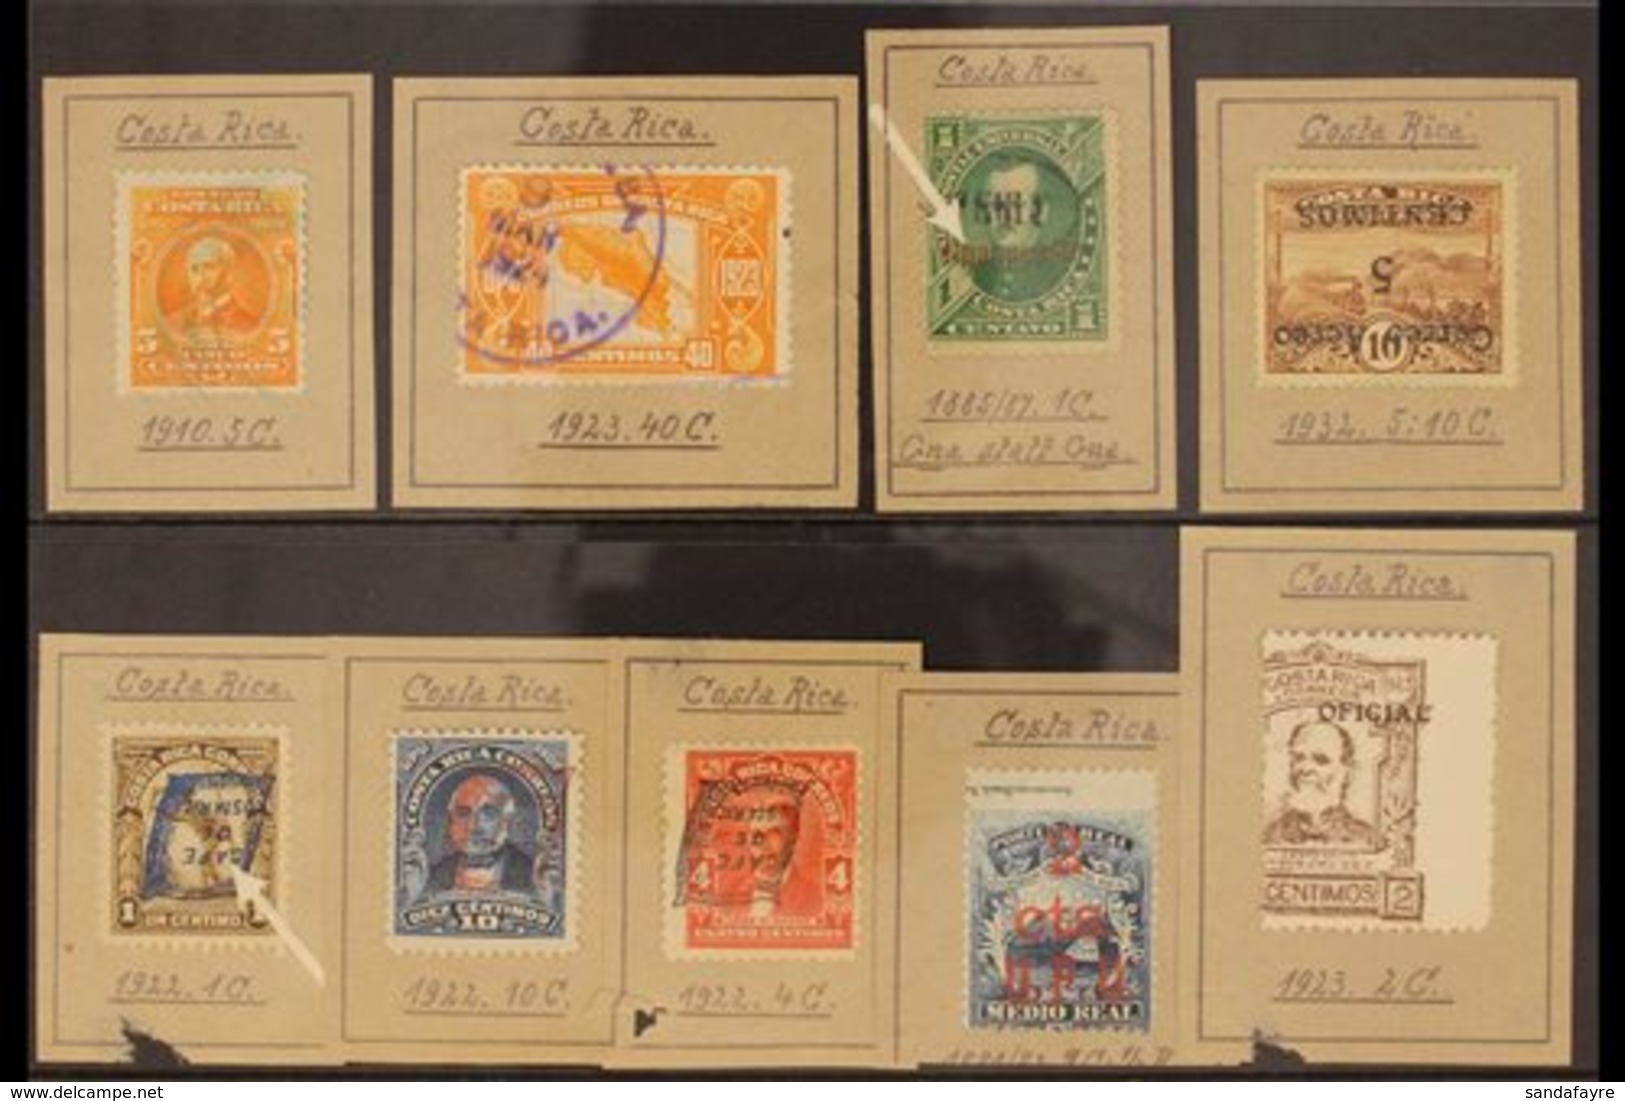 1881-1932 INTERESTING CURIOS.  A Small Selection Featuring Errors And Varieties. Includes 1885 Overprinted 1c With "Gnan - Costa Rica